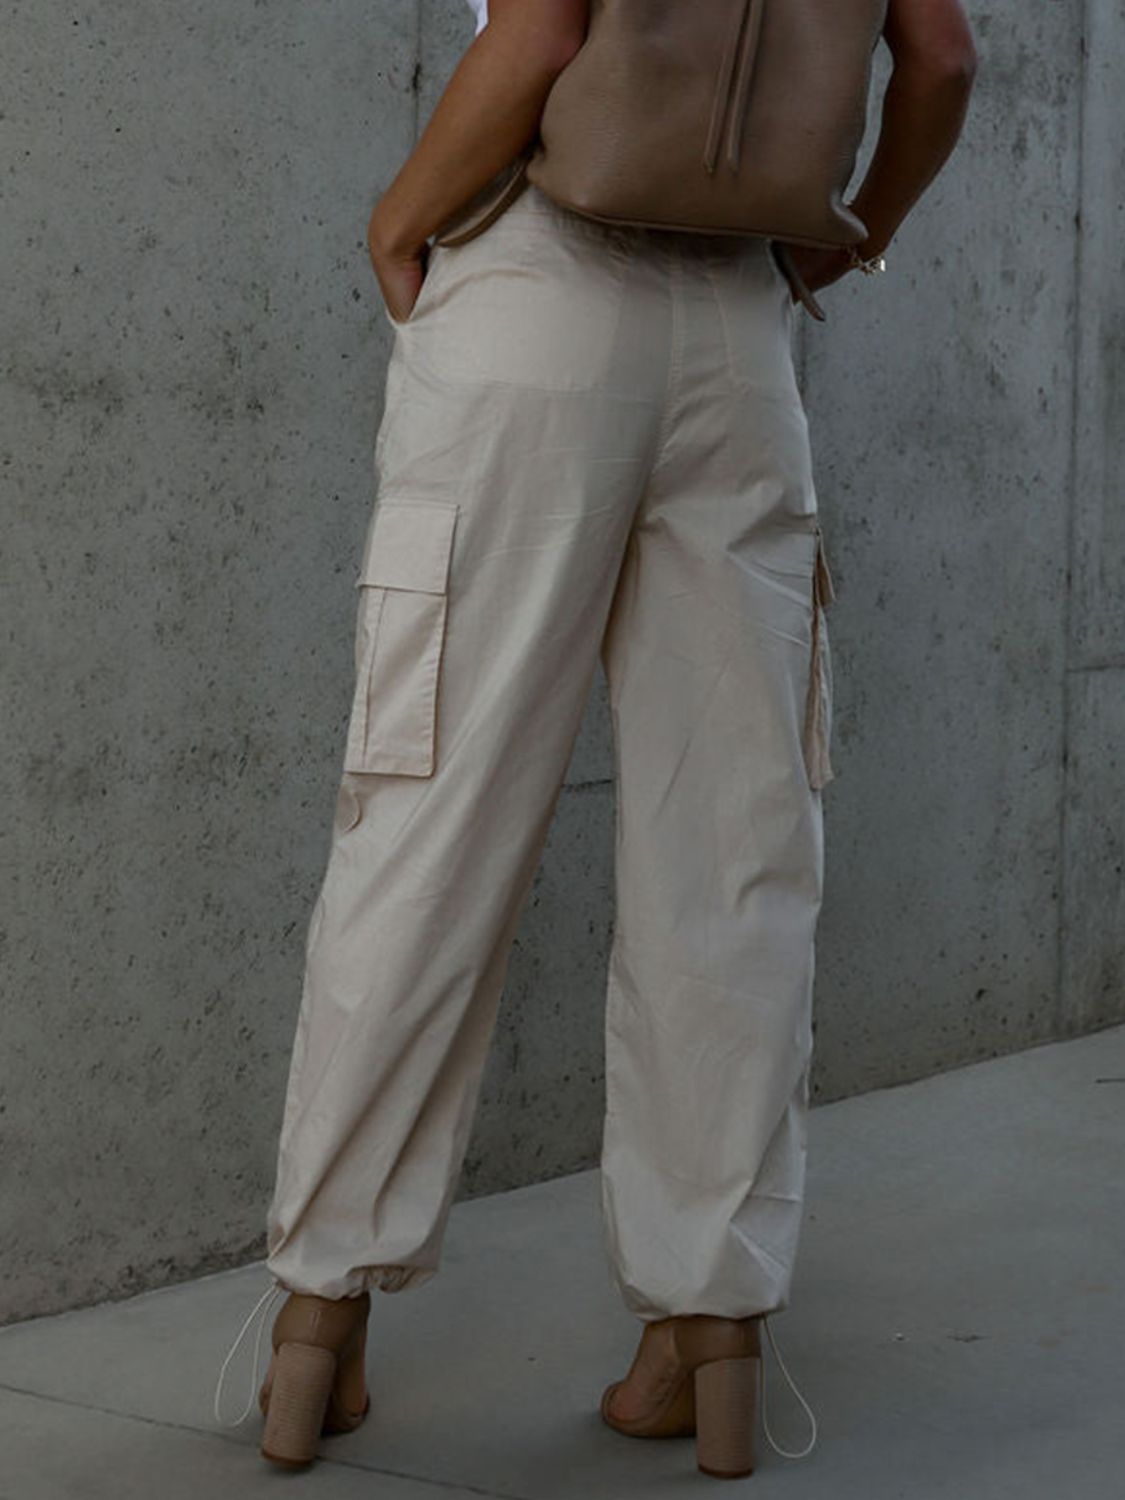 Drawstring Pants with Pockets - Fashion Girl Online Store